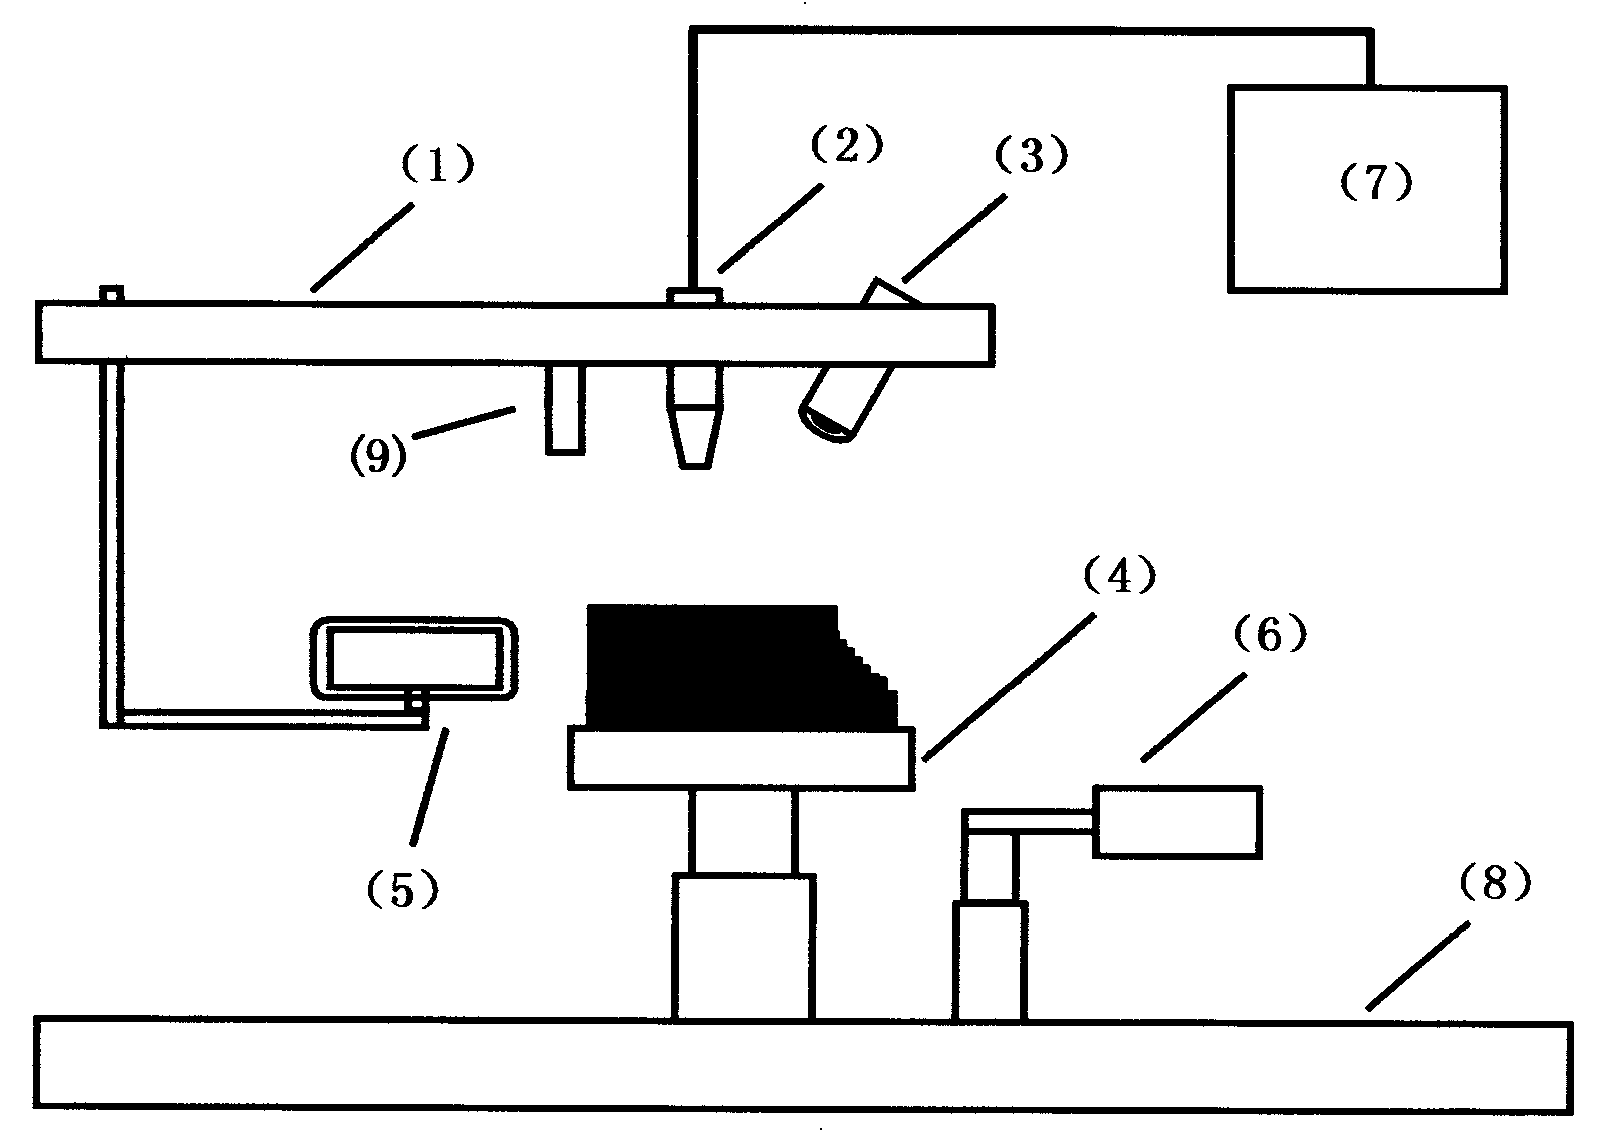 Three-dimensional (3D) printer and method for preparing three-dimensional products by use of 3D printer